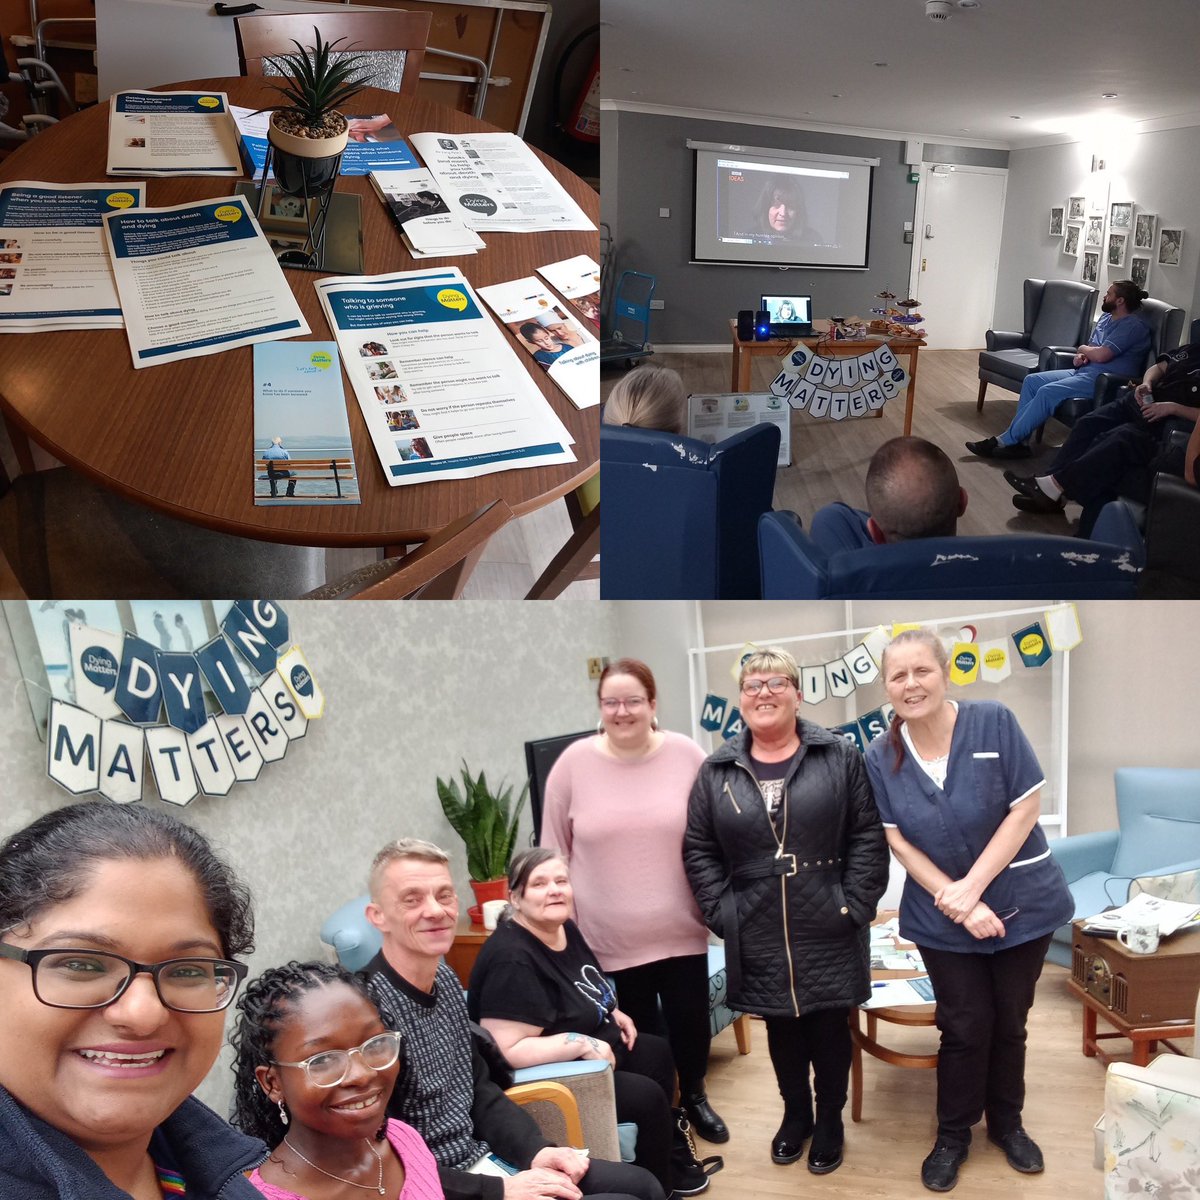 I’ve smiled my way through compiling these wonderful pics from the @DyingMatters events Geol our Educator @NewcastleHosps supporting Care Homes across Newcastle has facilitated over the last couple of weeks with great engagement from all the teams (shared with permission) 1/3